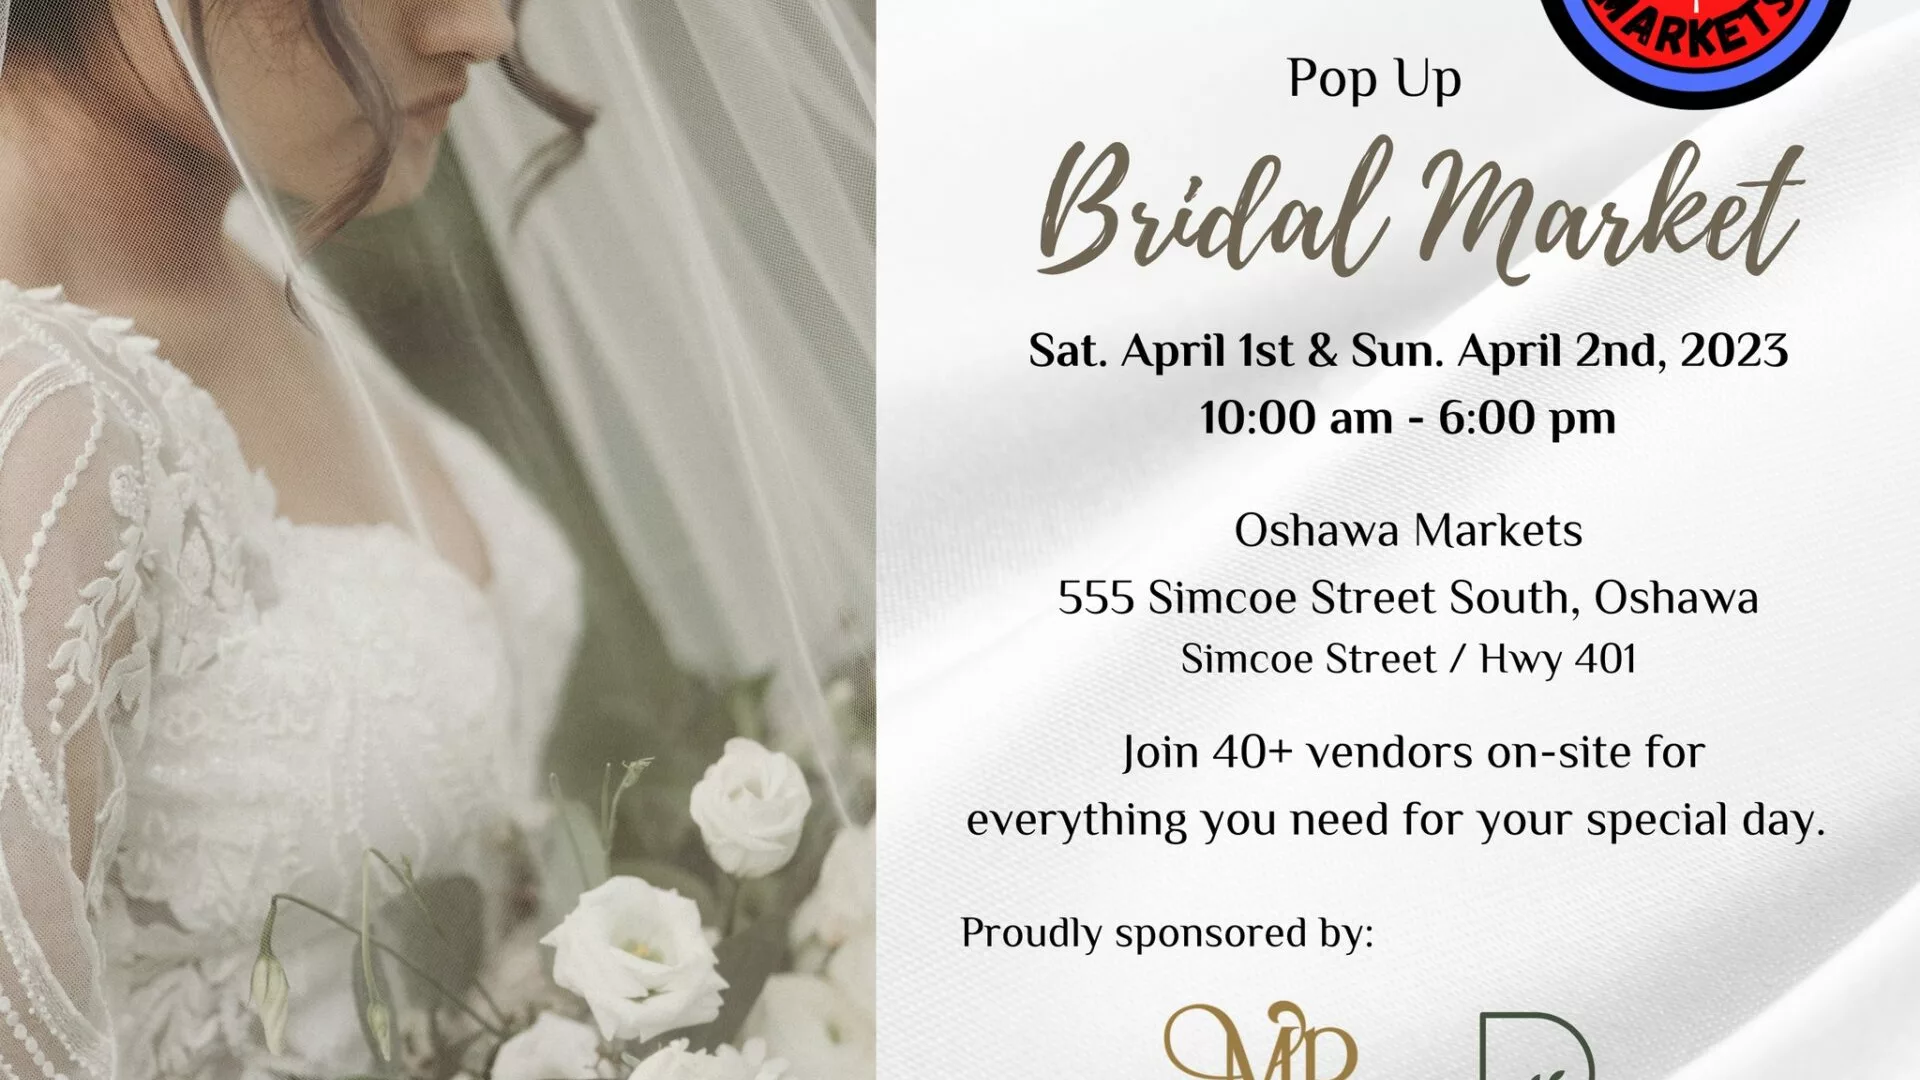 An image of 1 person and text that says 'OSHAWA MARKETS Pop Up Bridal Market Sat. April 1st & Sun. April 2nd, 2023 10:00 am 6:00 pm Oshawa Markets 555 Simcoe Street South, Oshawa Simcoe Street Hwy 401 Join 40+ vendors on-site for everything you need for your special day. Proudly sponsored by: MEMORY PARCHED BLVD LORAL